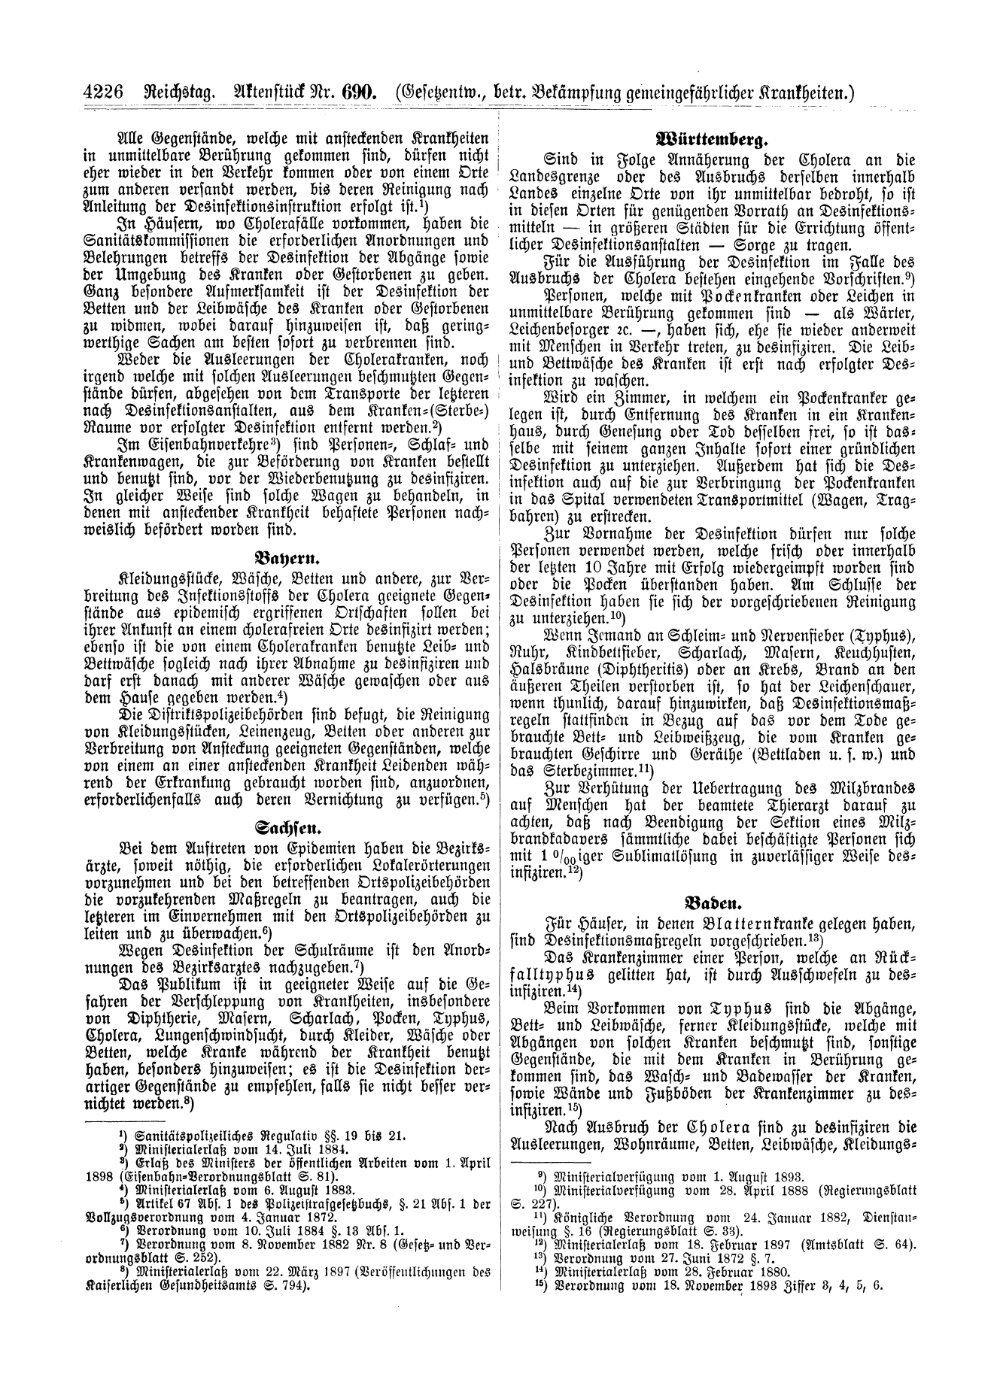 Scan of page 4226